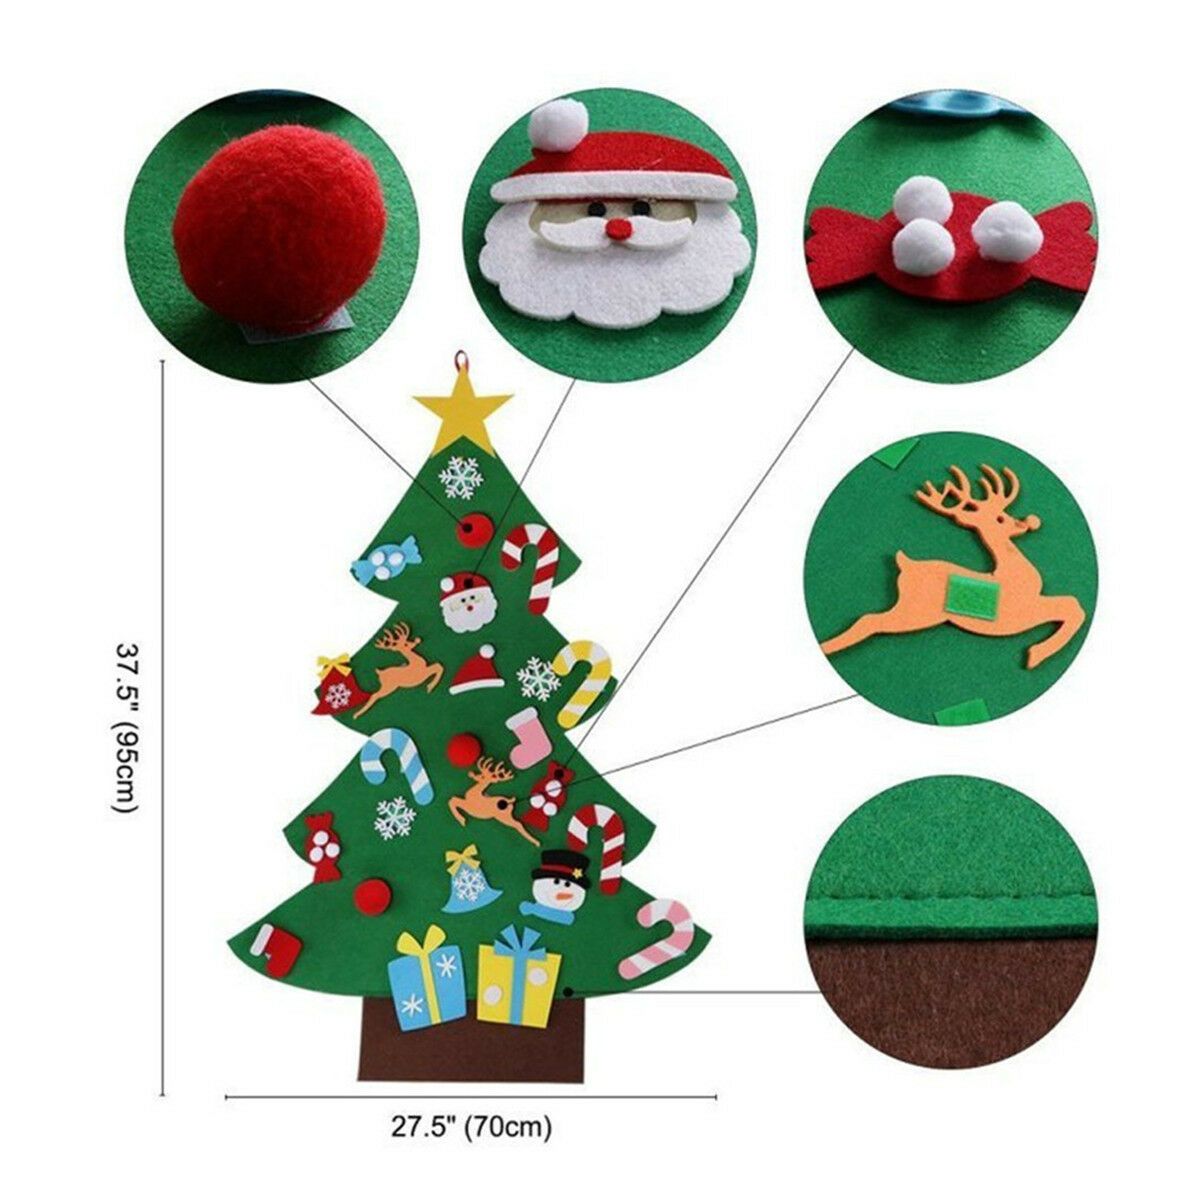 Felt Christmas Tree with Removable Decorations Ebay 